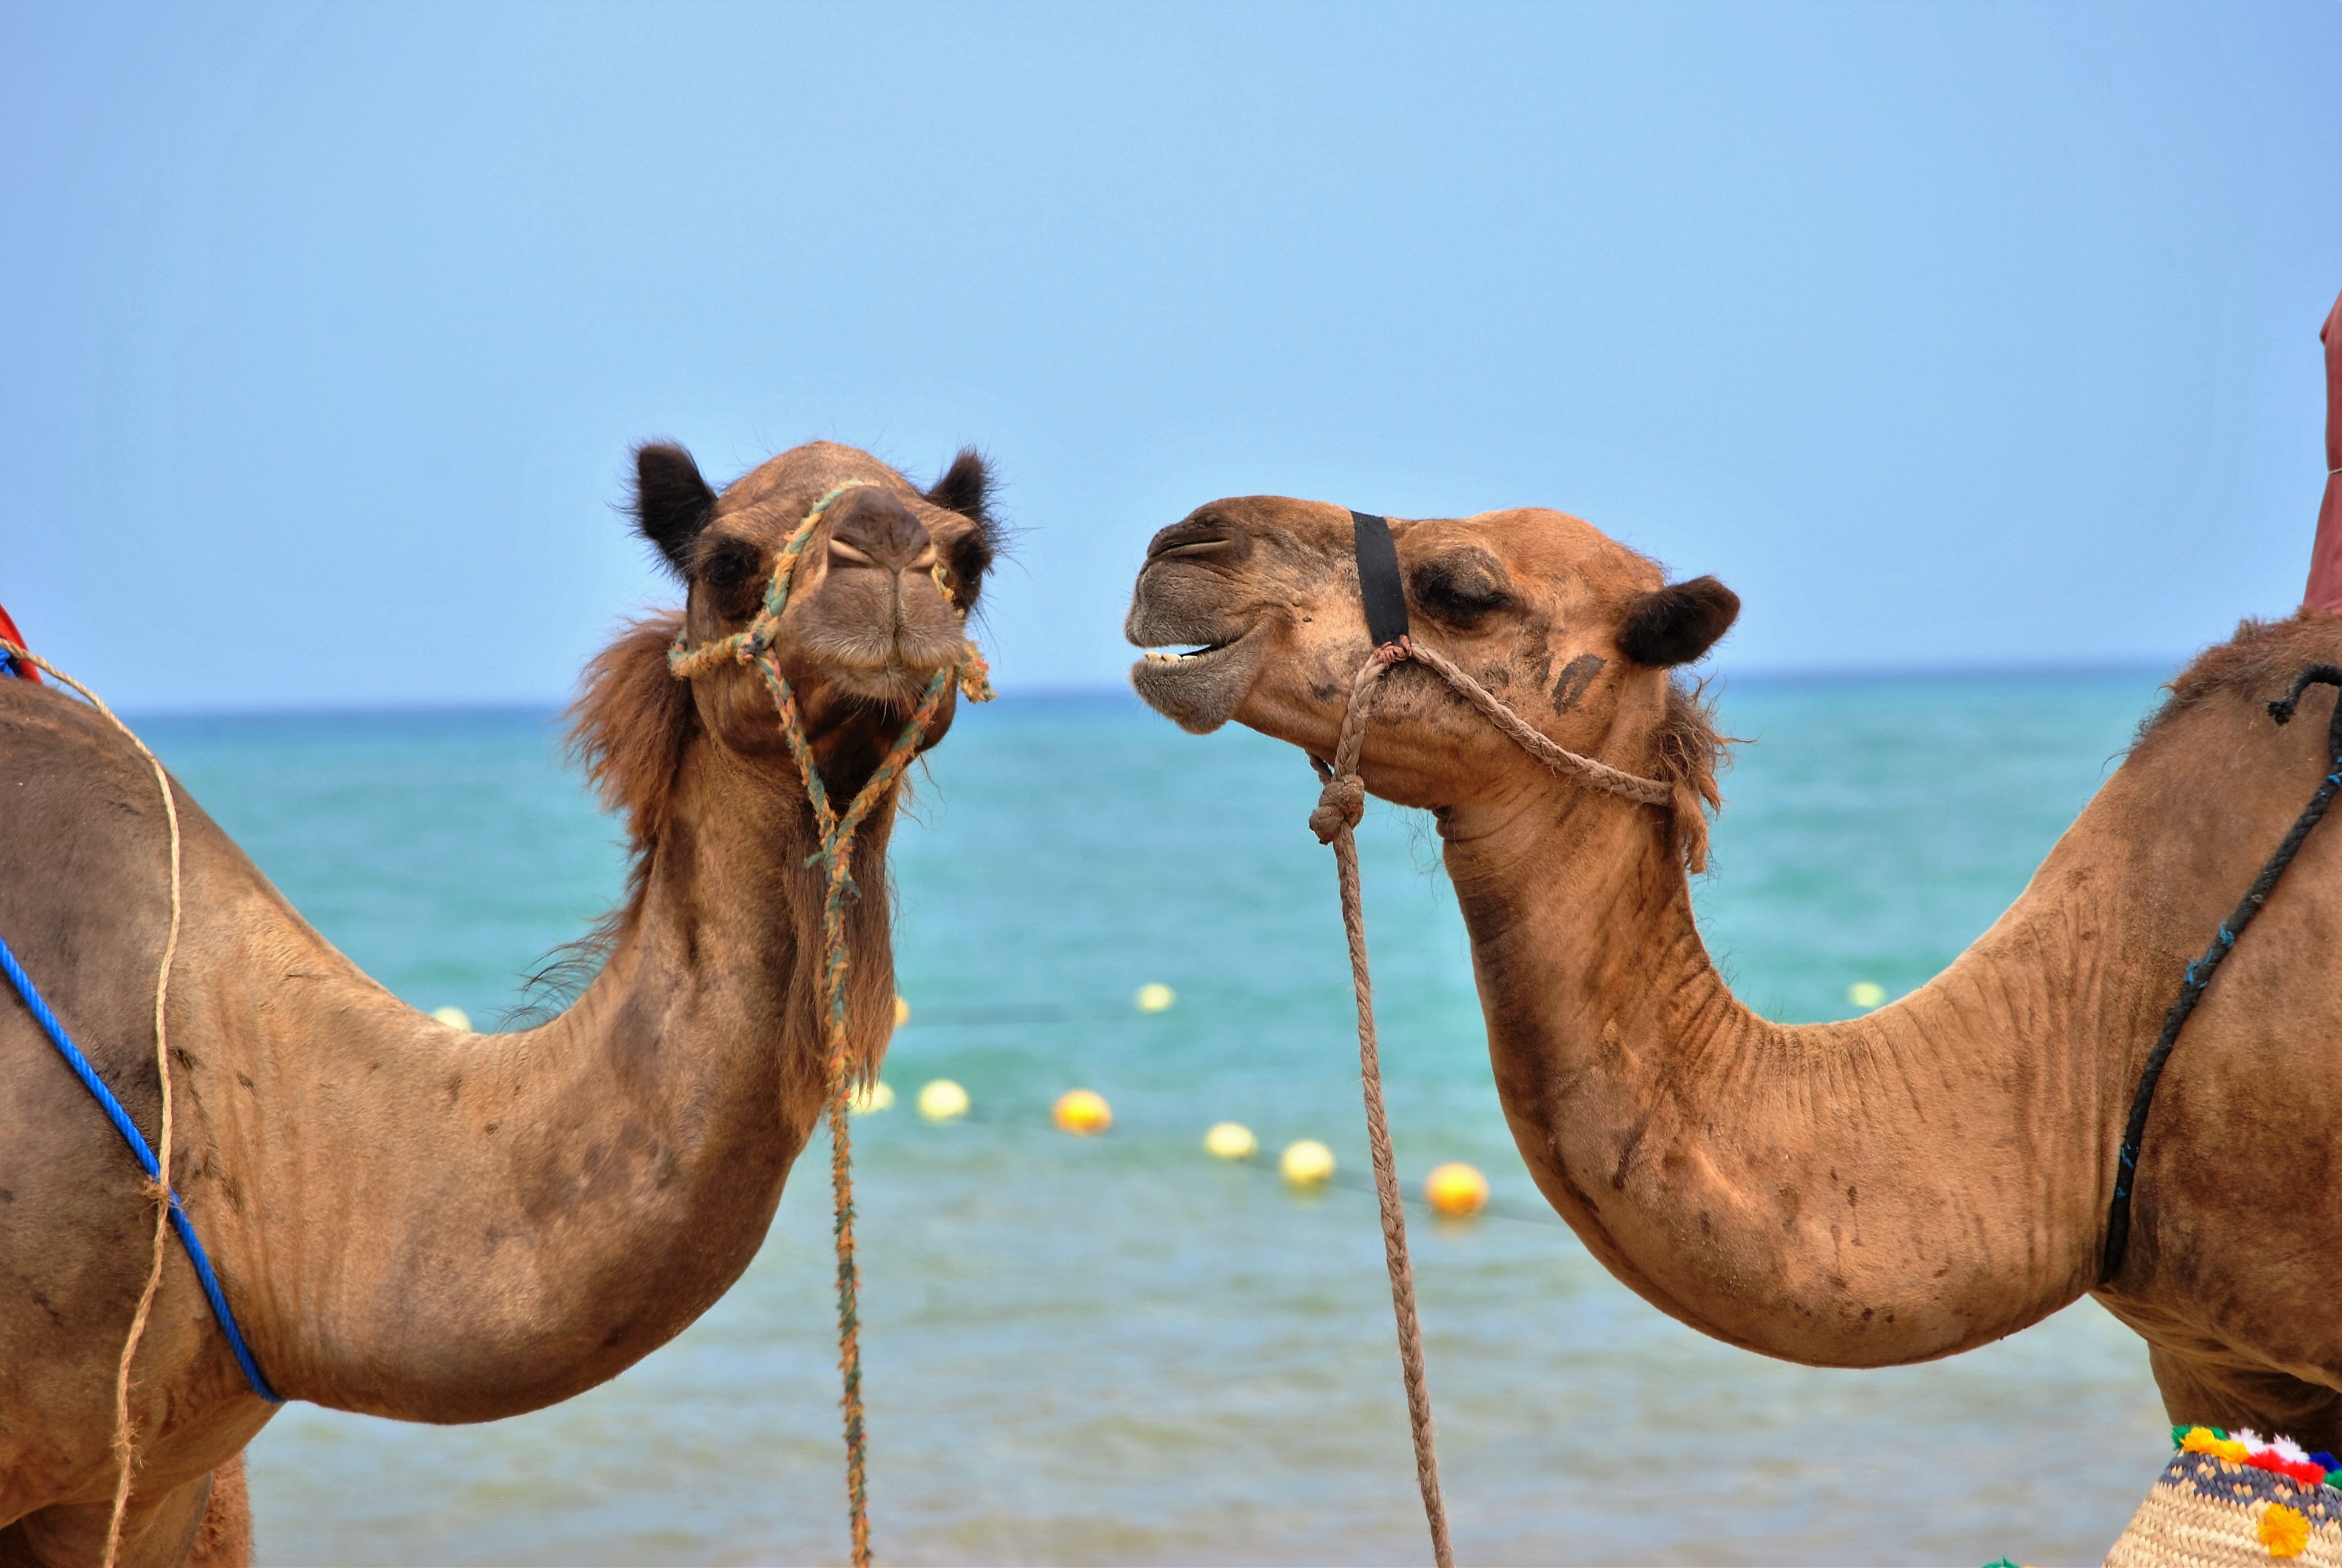 Valley of Camels Tour in Marsa alam